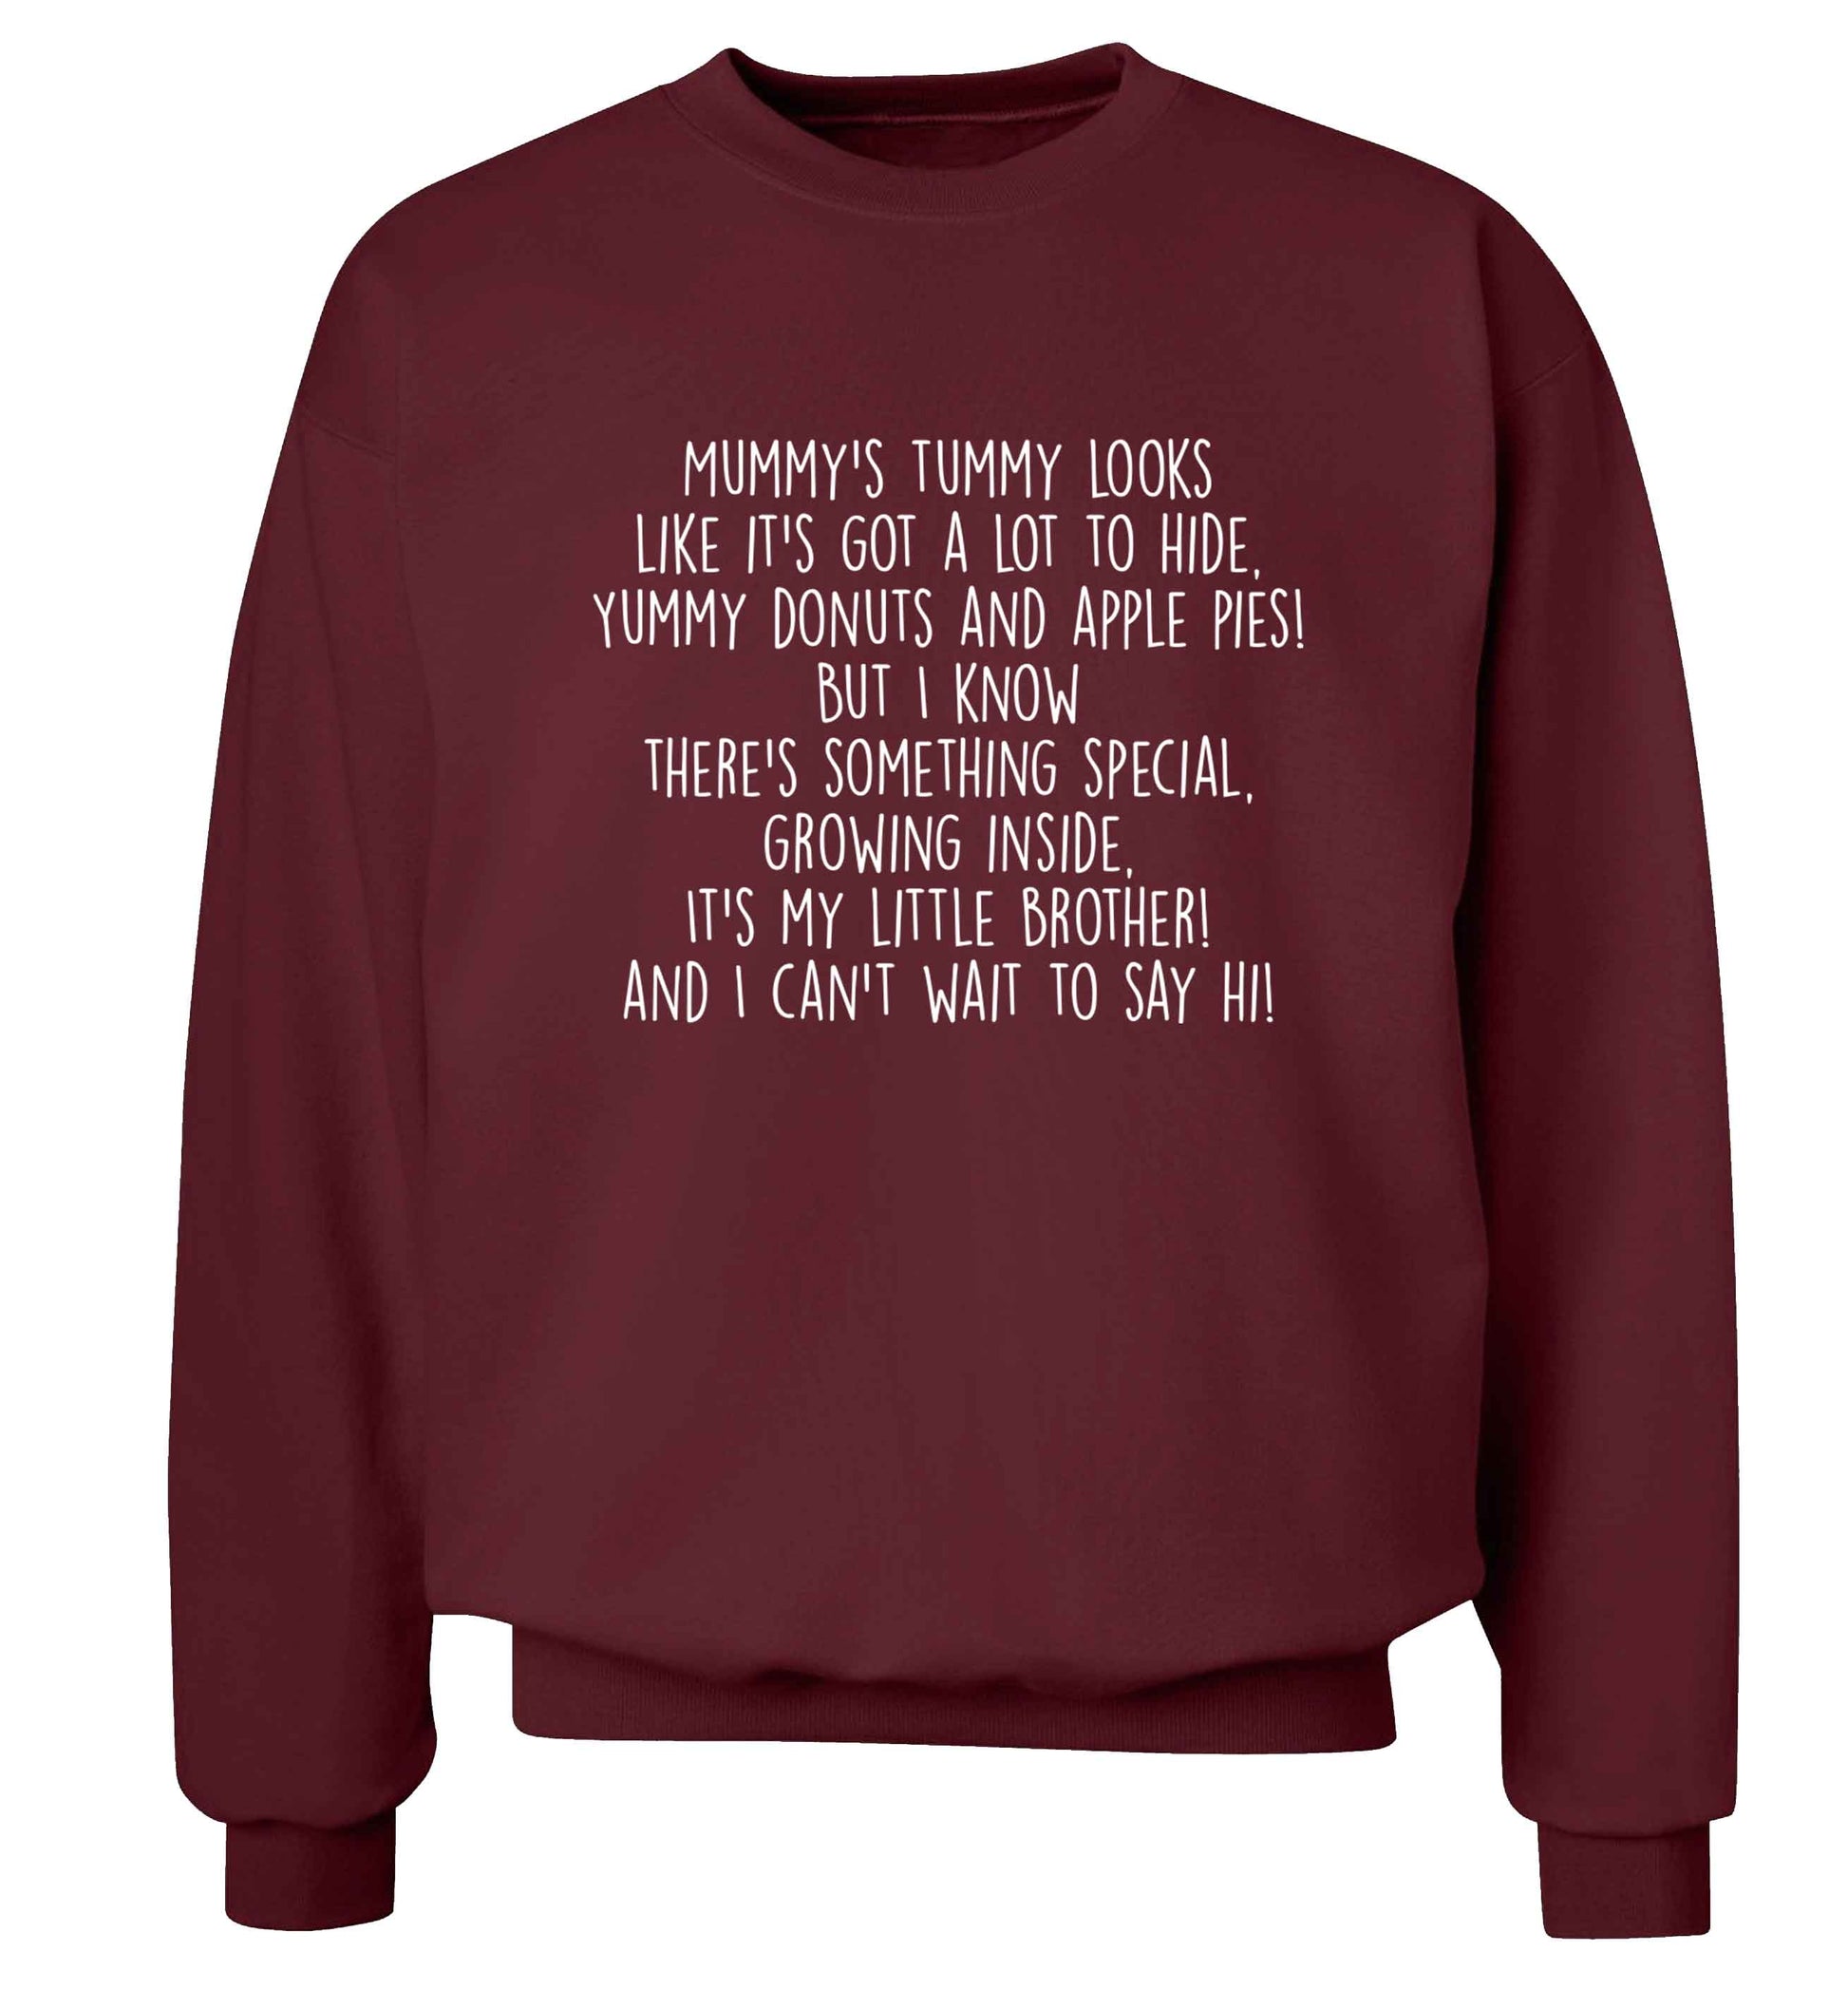 Something special growing inside it's my little brother I can't wait to say hi! Adult's unisex maroon Sweater 2XL